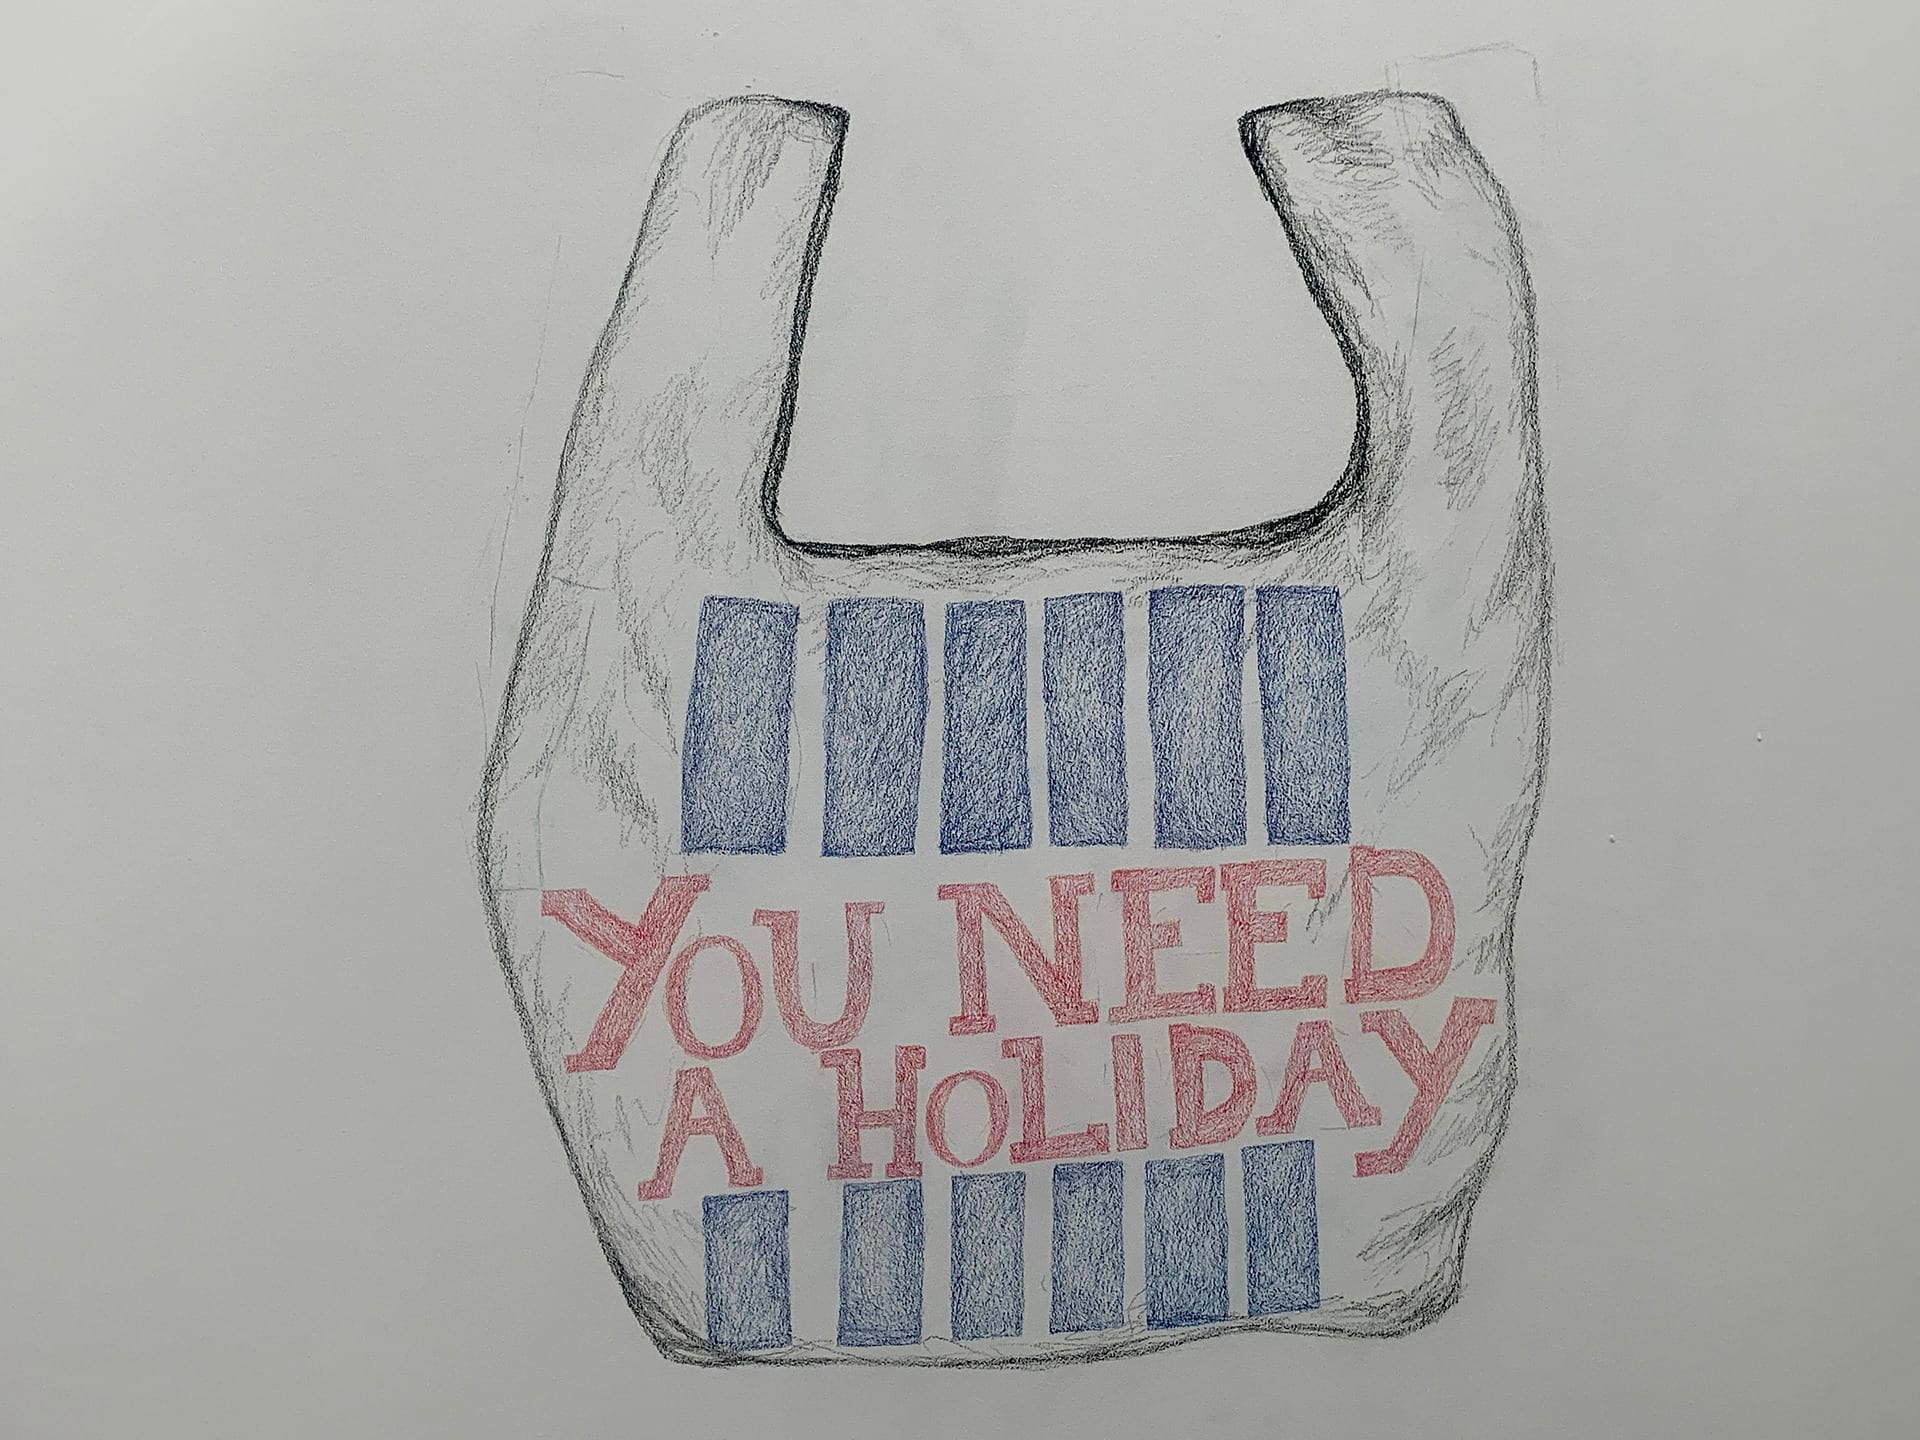 Drawing of a plastic supermarket shopping bag front on, featuring a design of blue rectangular blocks in a row above and below red lettering which says ‘You Need A Holiday’.